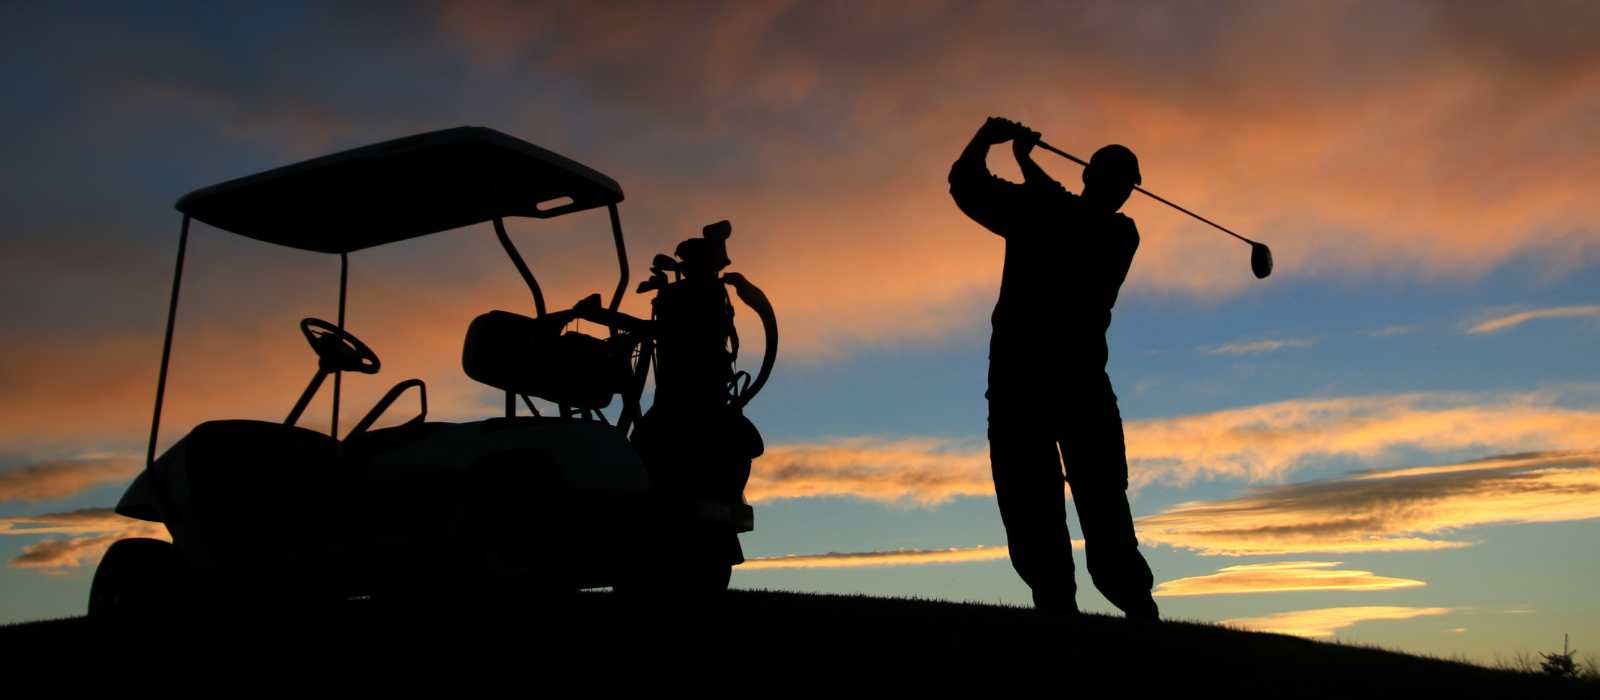 Golf: A pathway to wellness, networking, and success